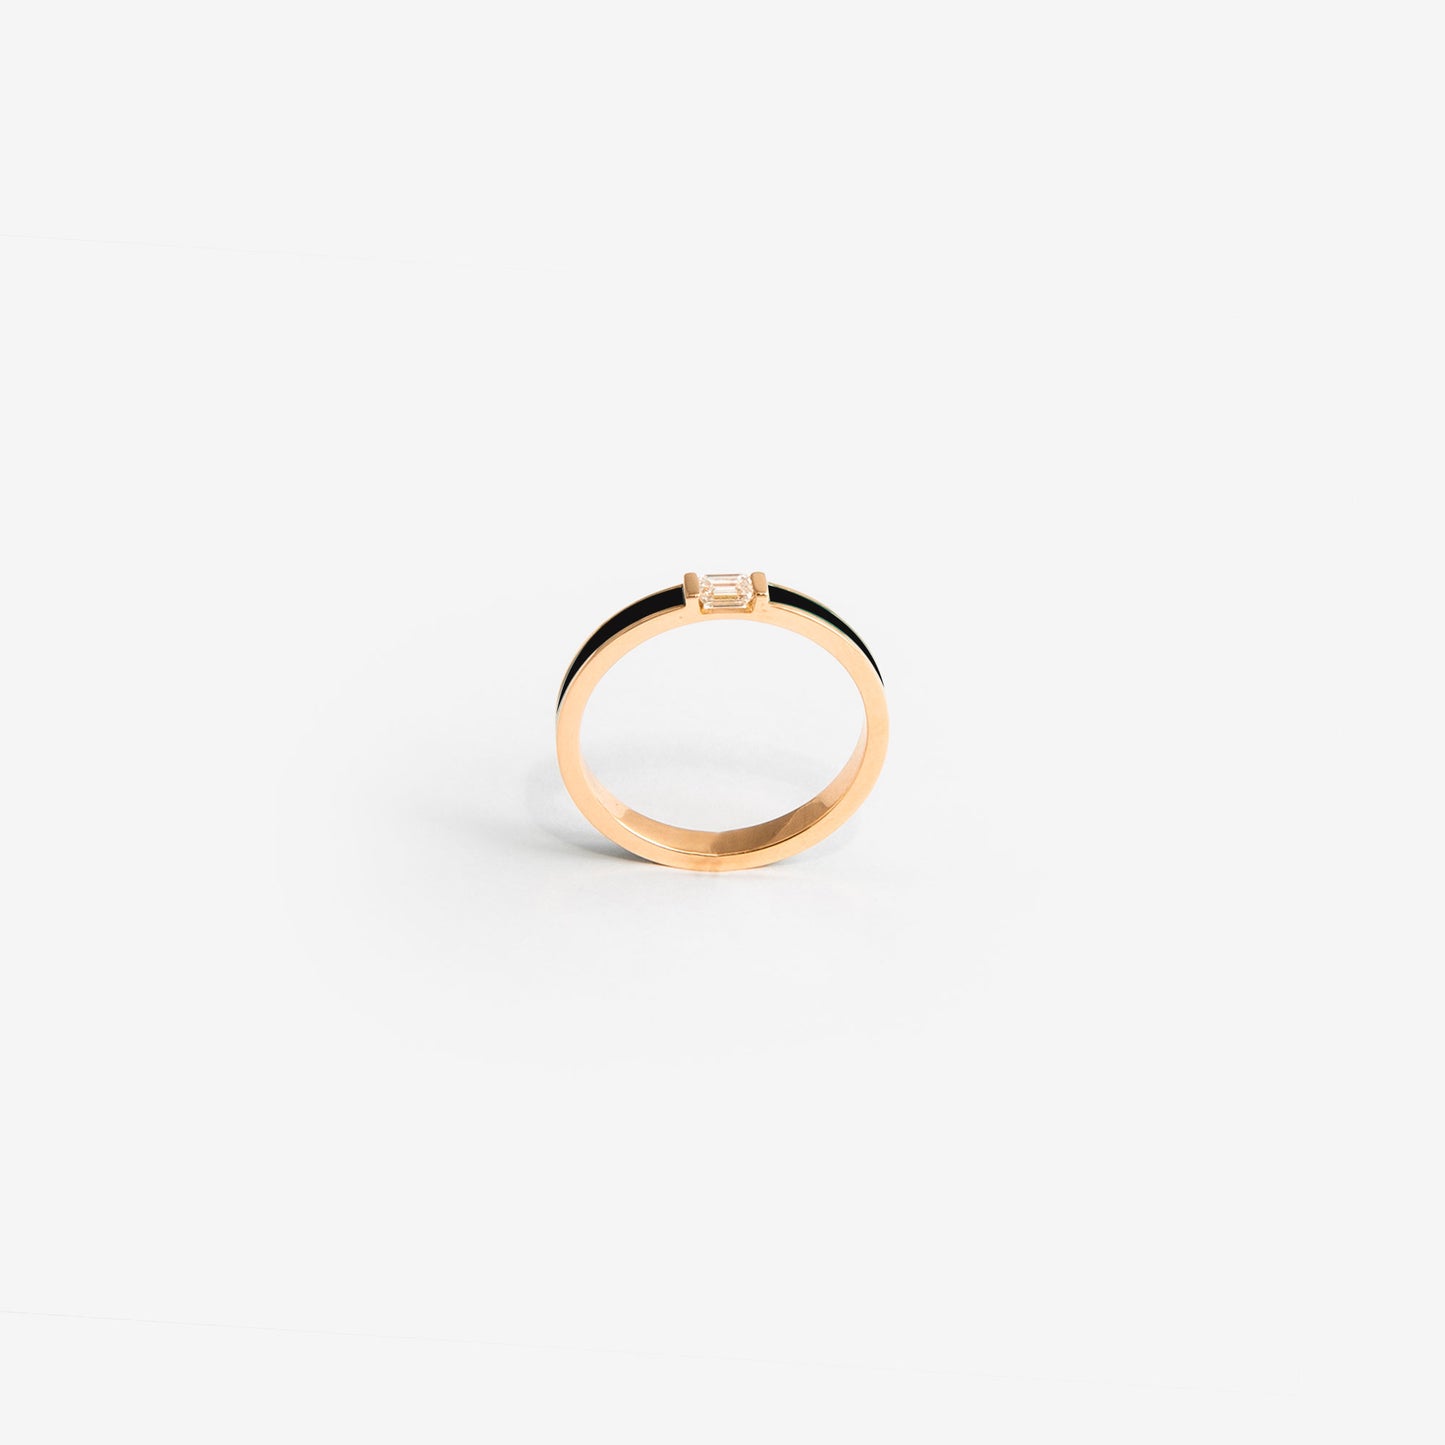 Rose gold band with black enamel and a diamond